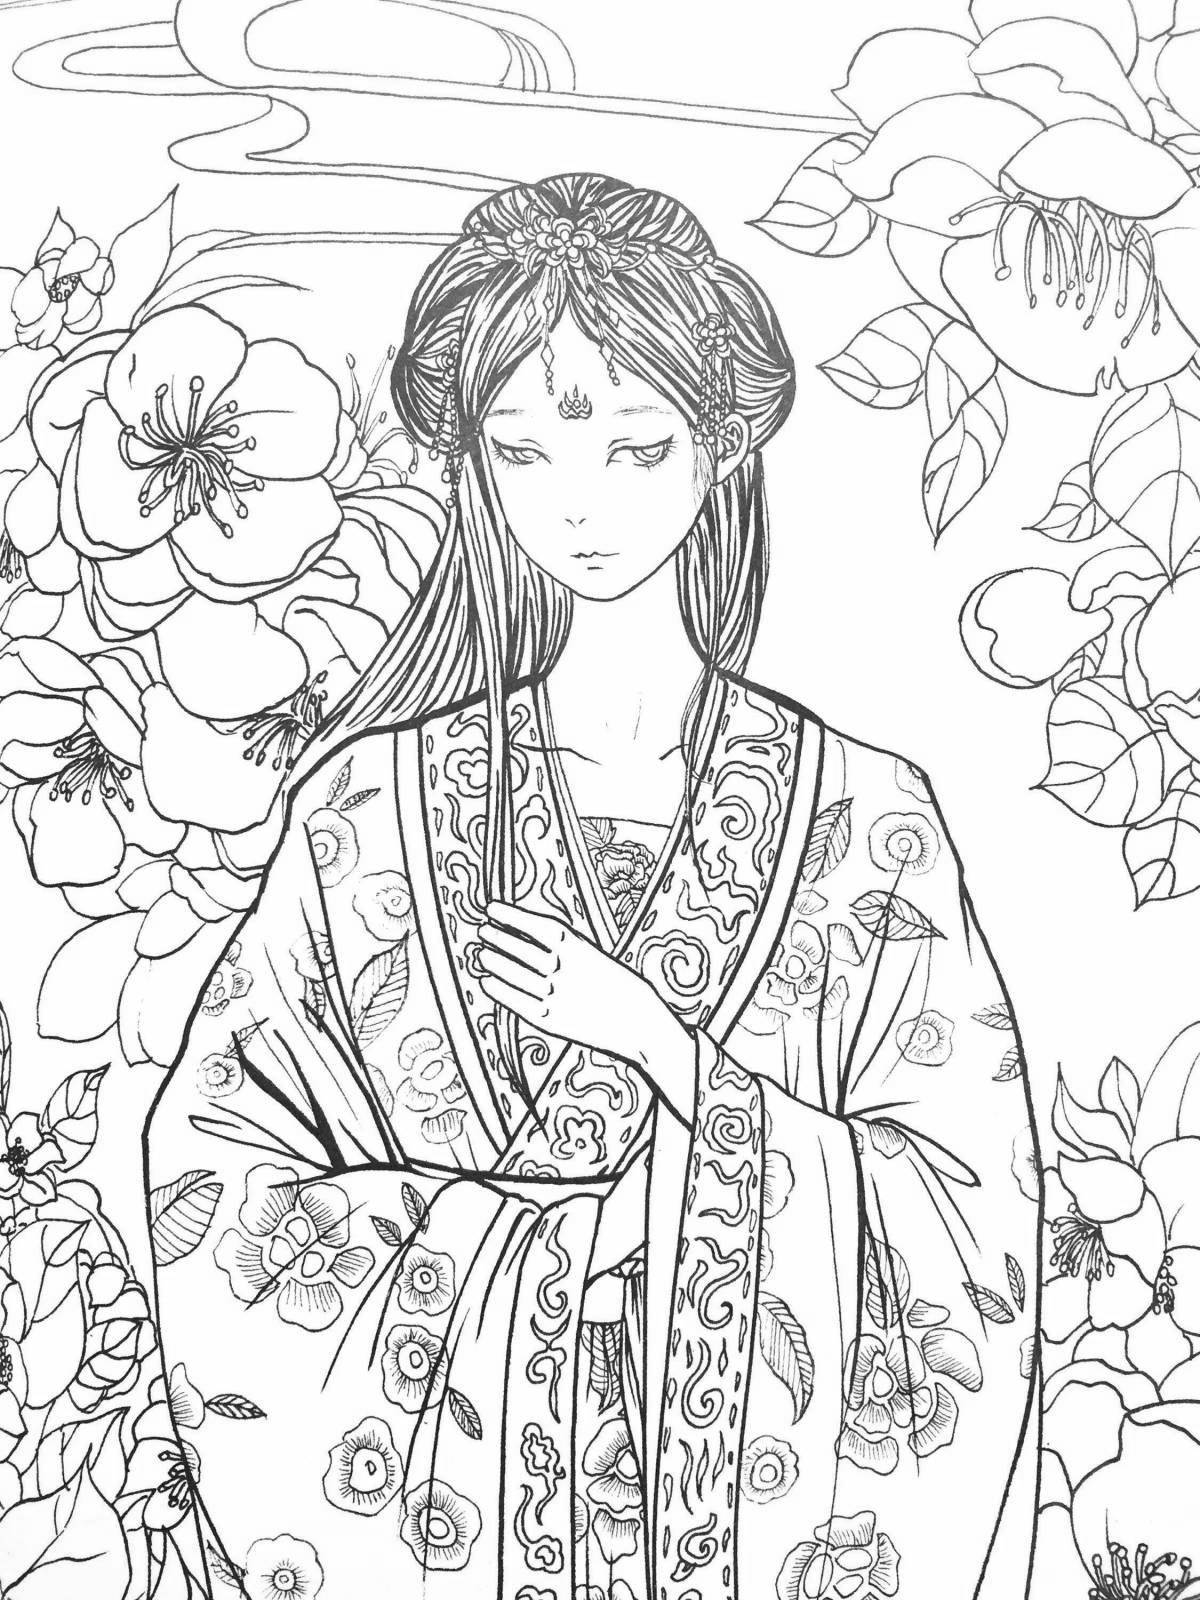 Glorious Chinese motif coloring page